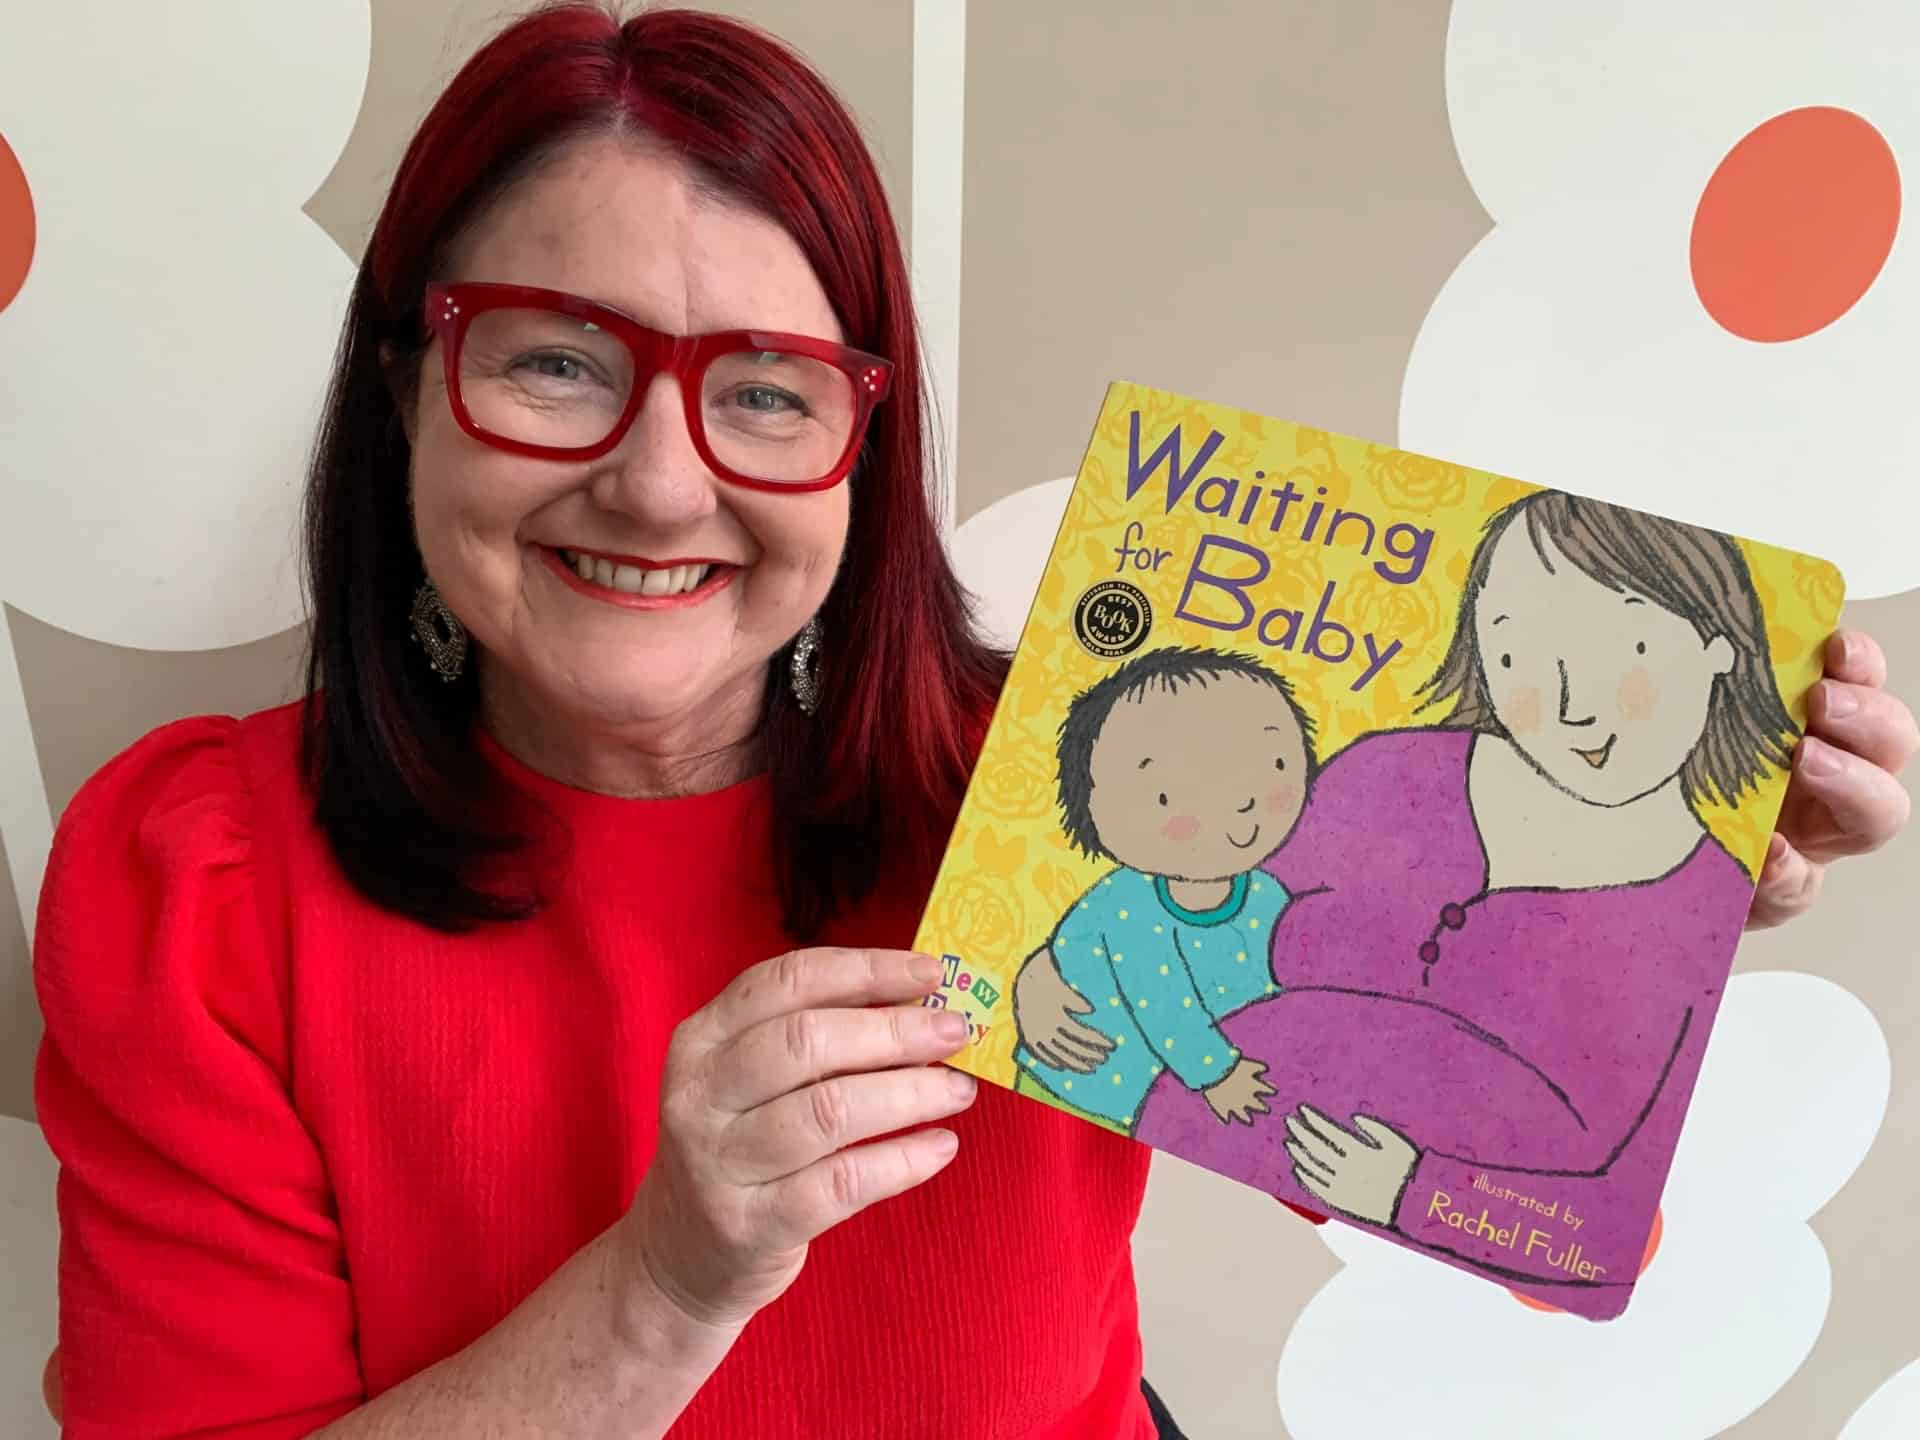 Waiting for Baby - Book review by Rowena Thomas | 'Amazing Me'